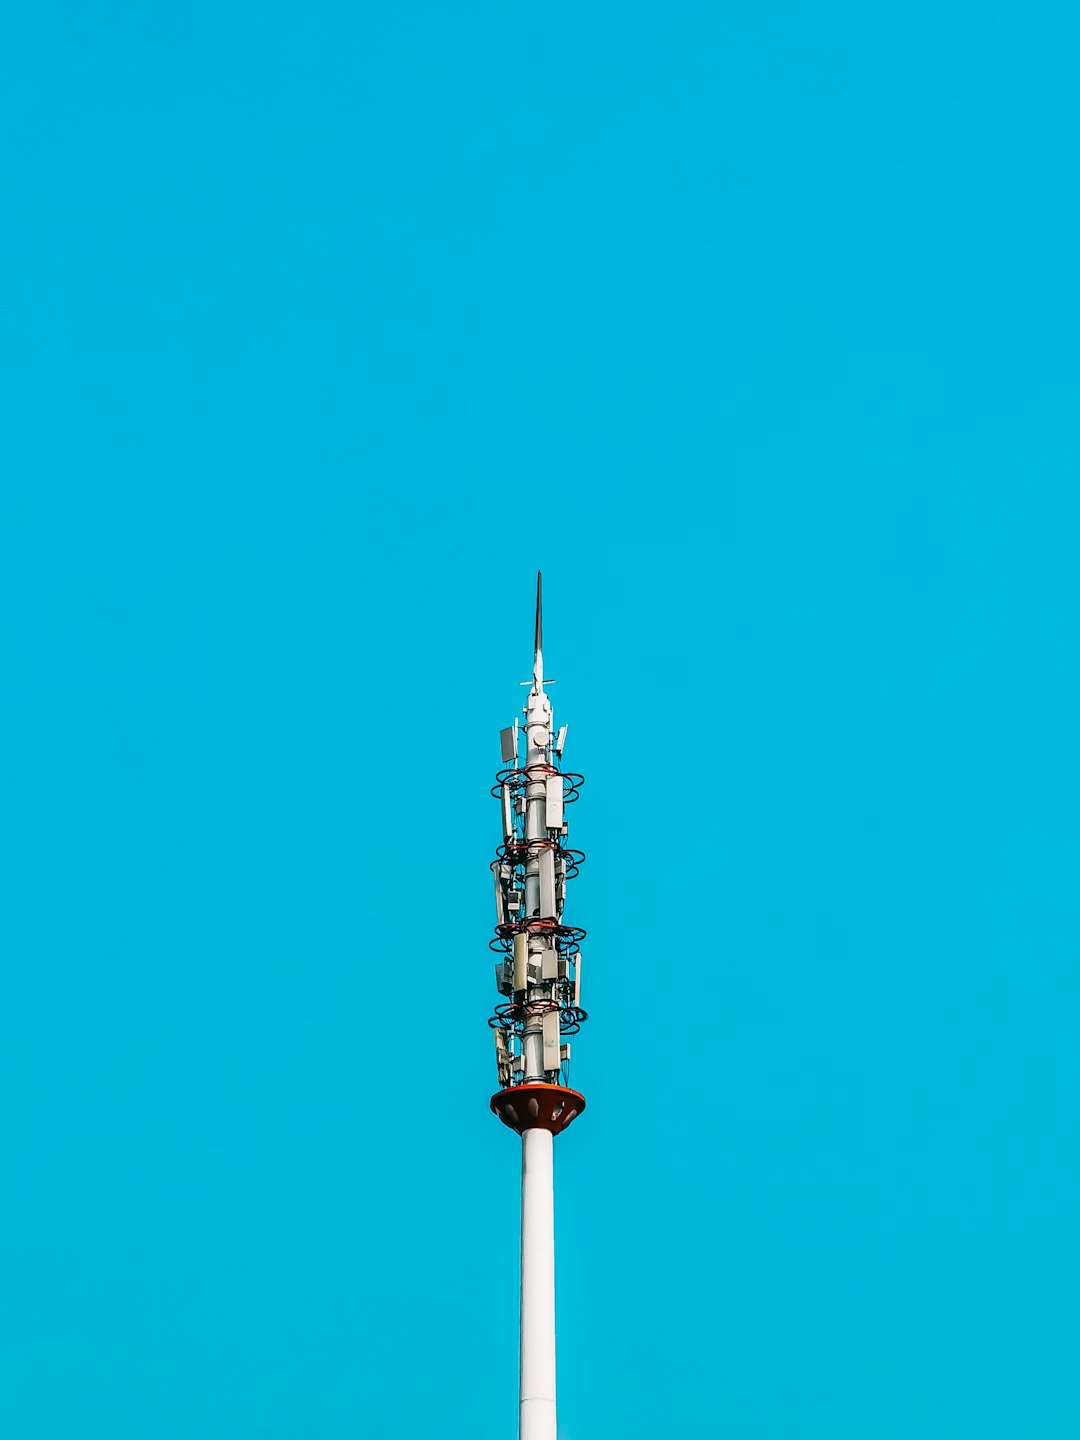 white and black tower under blue sky during daytime